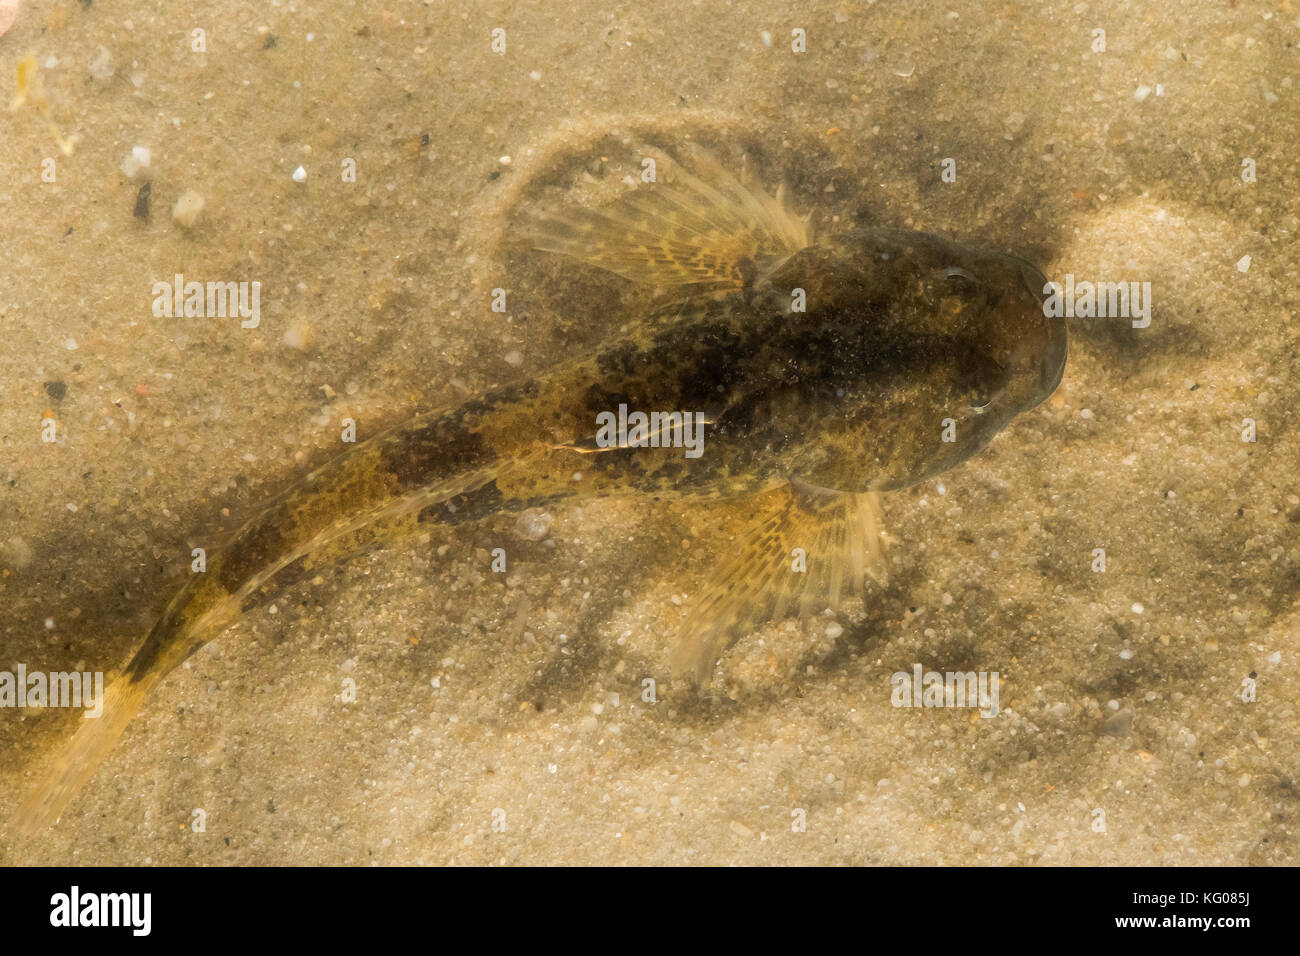 European bullhead fish (Cottus gobio) from above. A freshwater fish photographed from above camouflaged against sand at bottom of stream Stock Photo